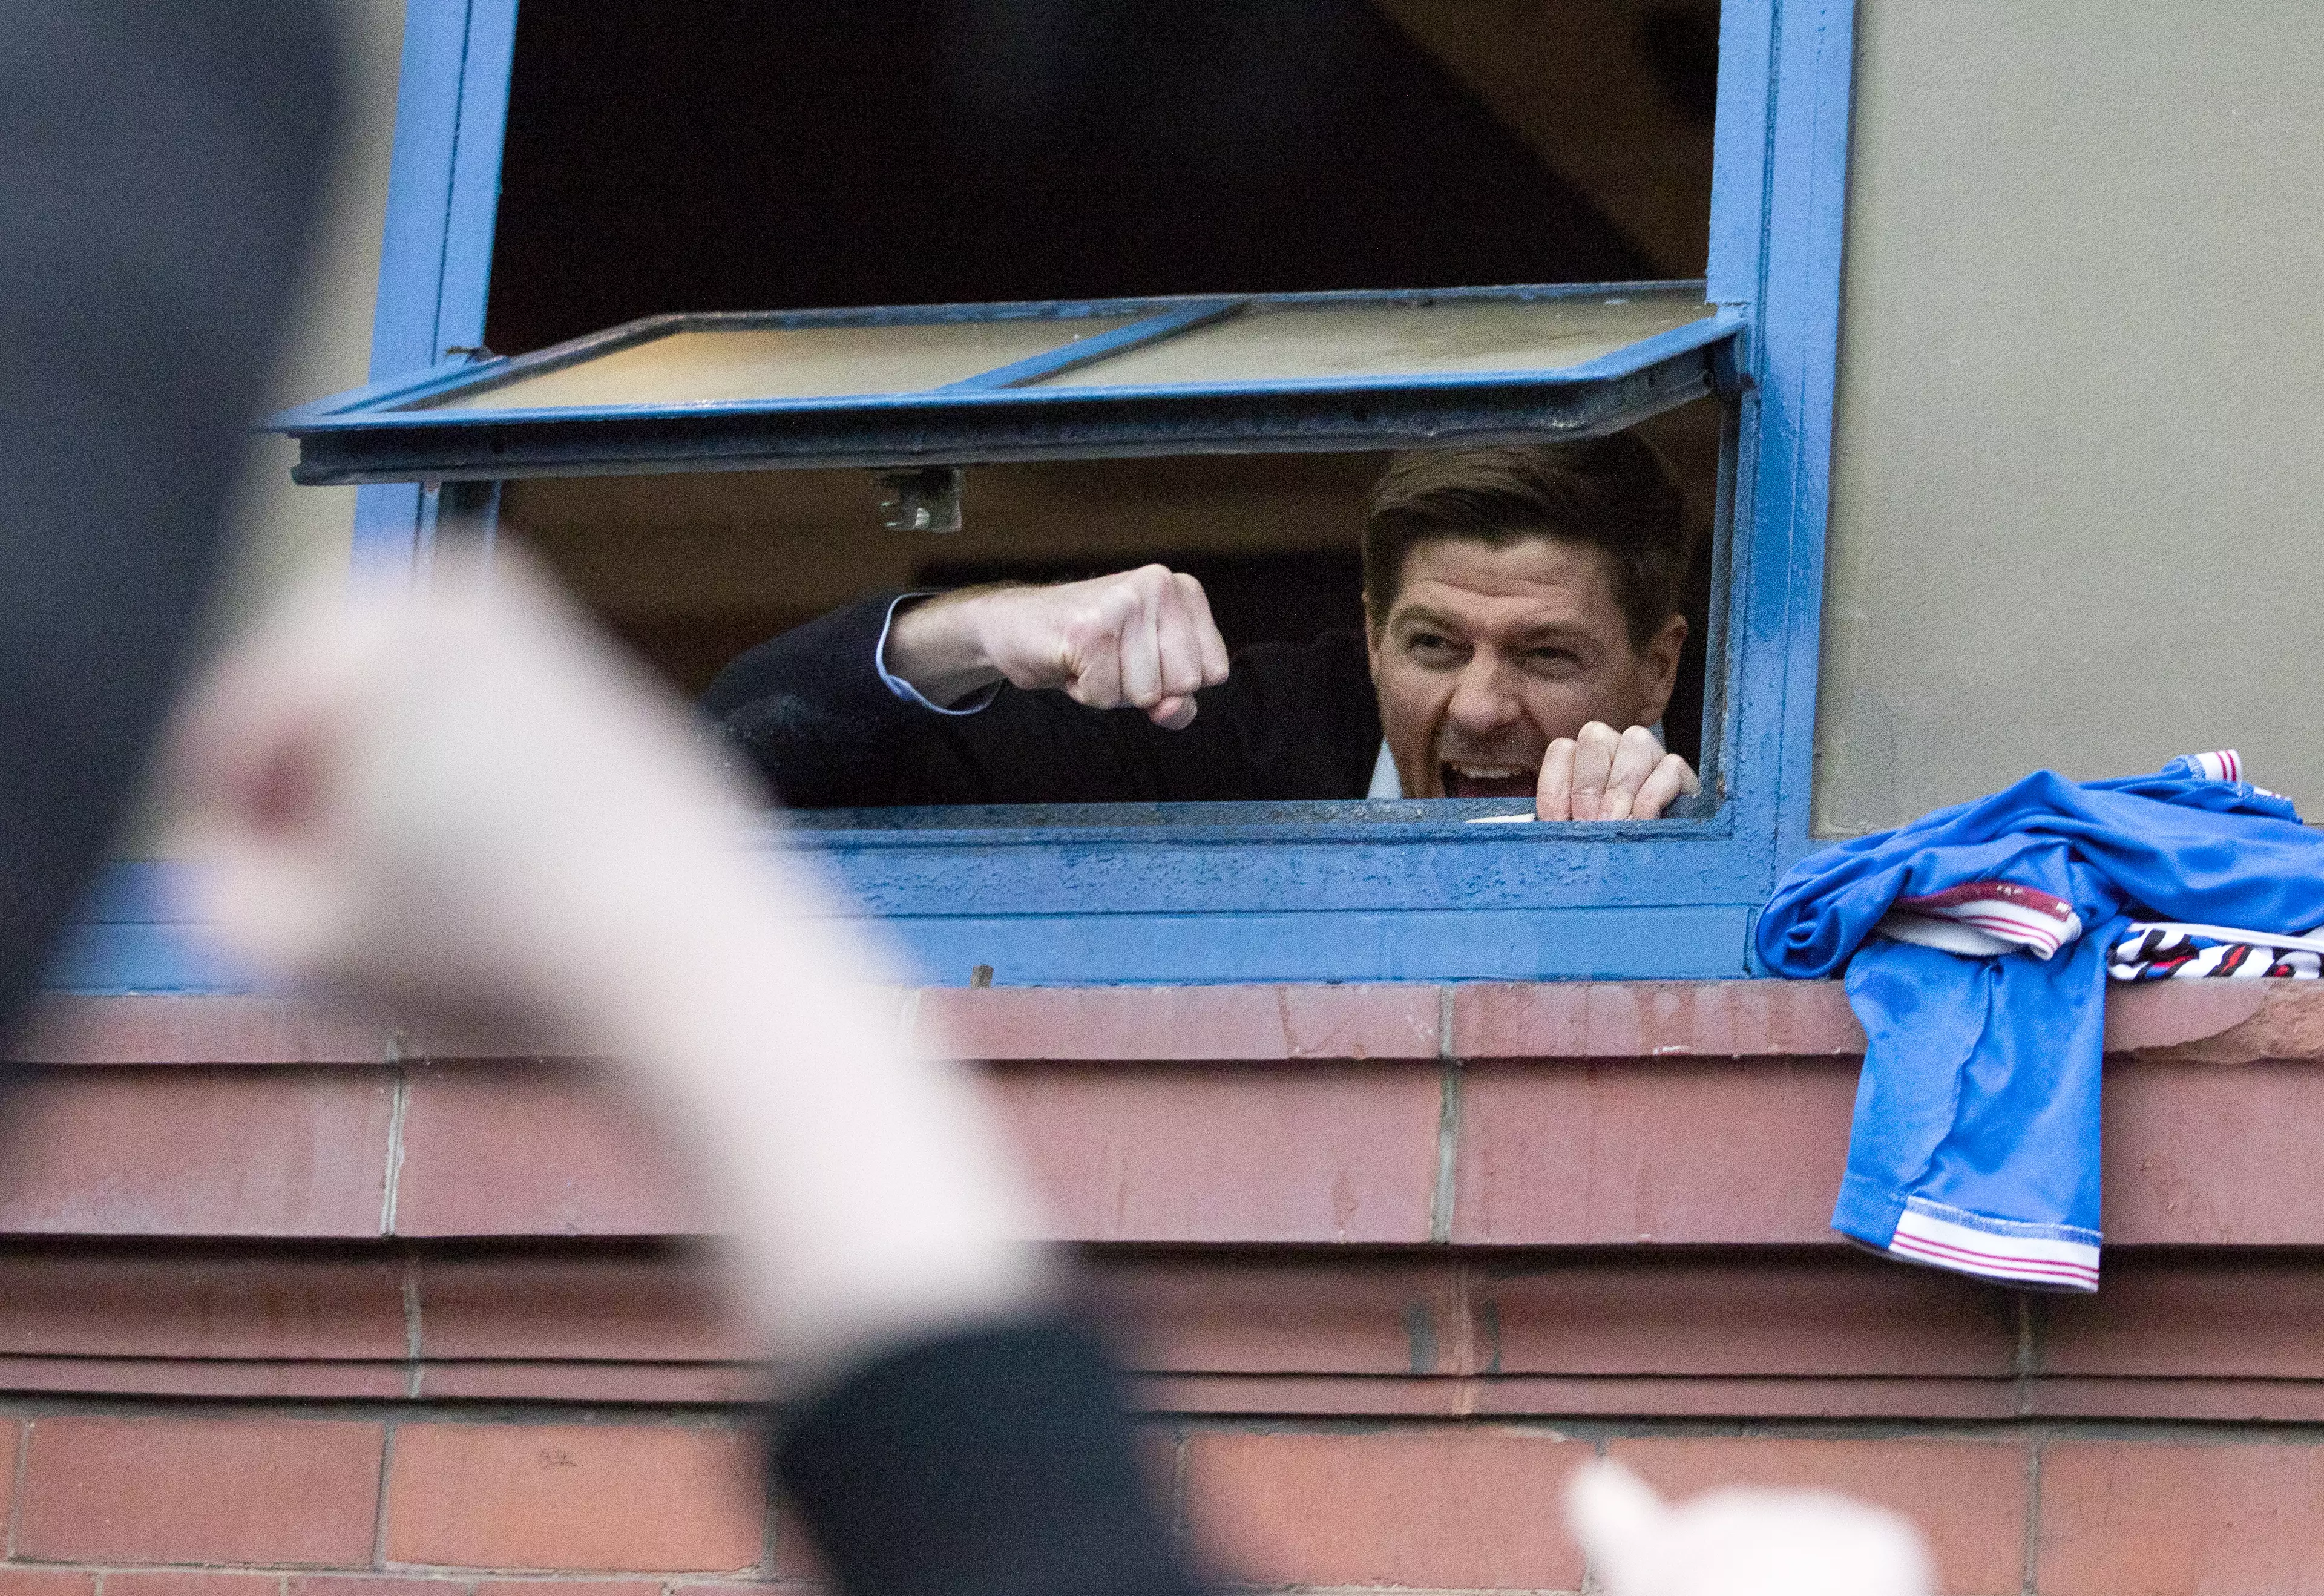 Steven Gerrard celebrated with Rangers fans after the win over St Mirren. Image: PA Images